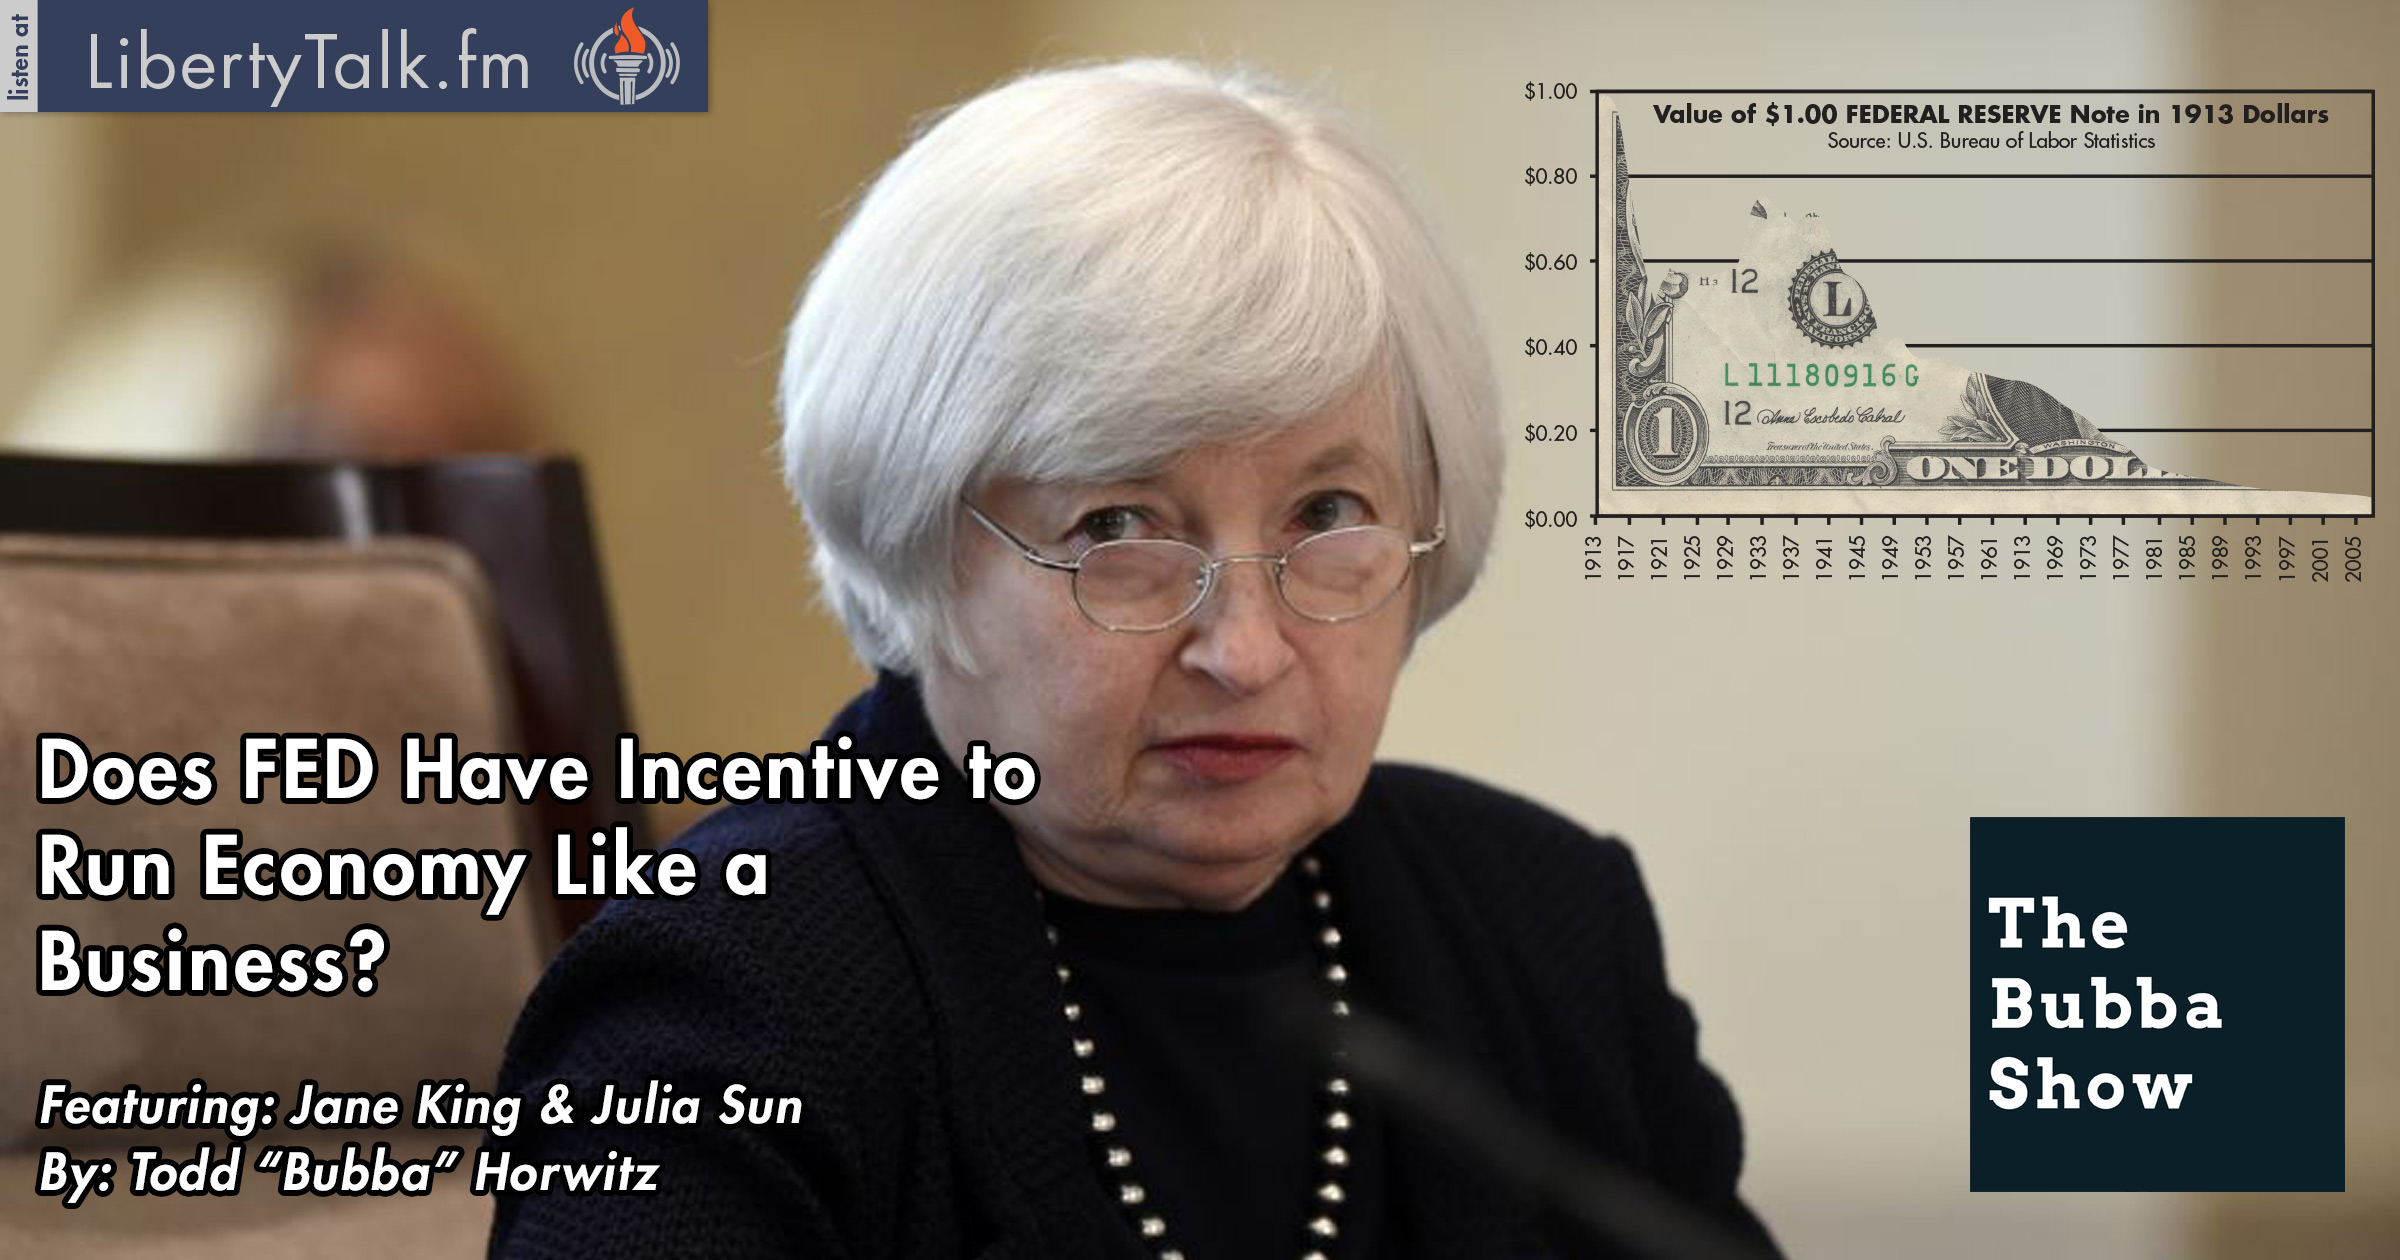 Does FED Have Incentive to Run Economy Like a Business